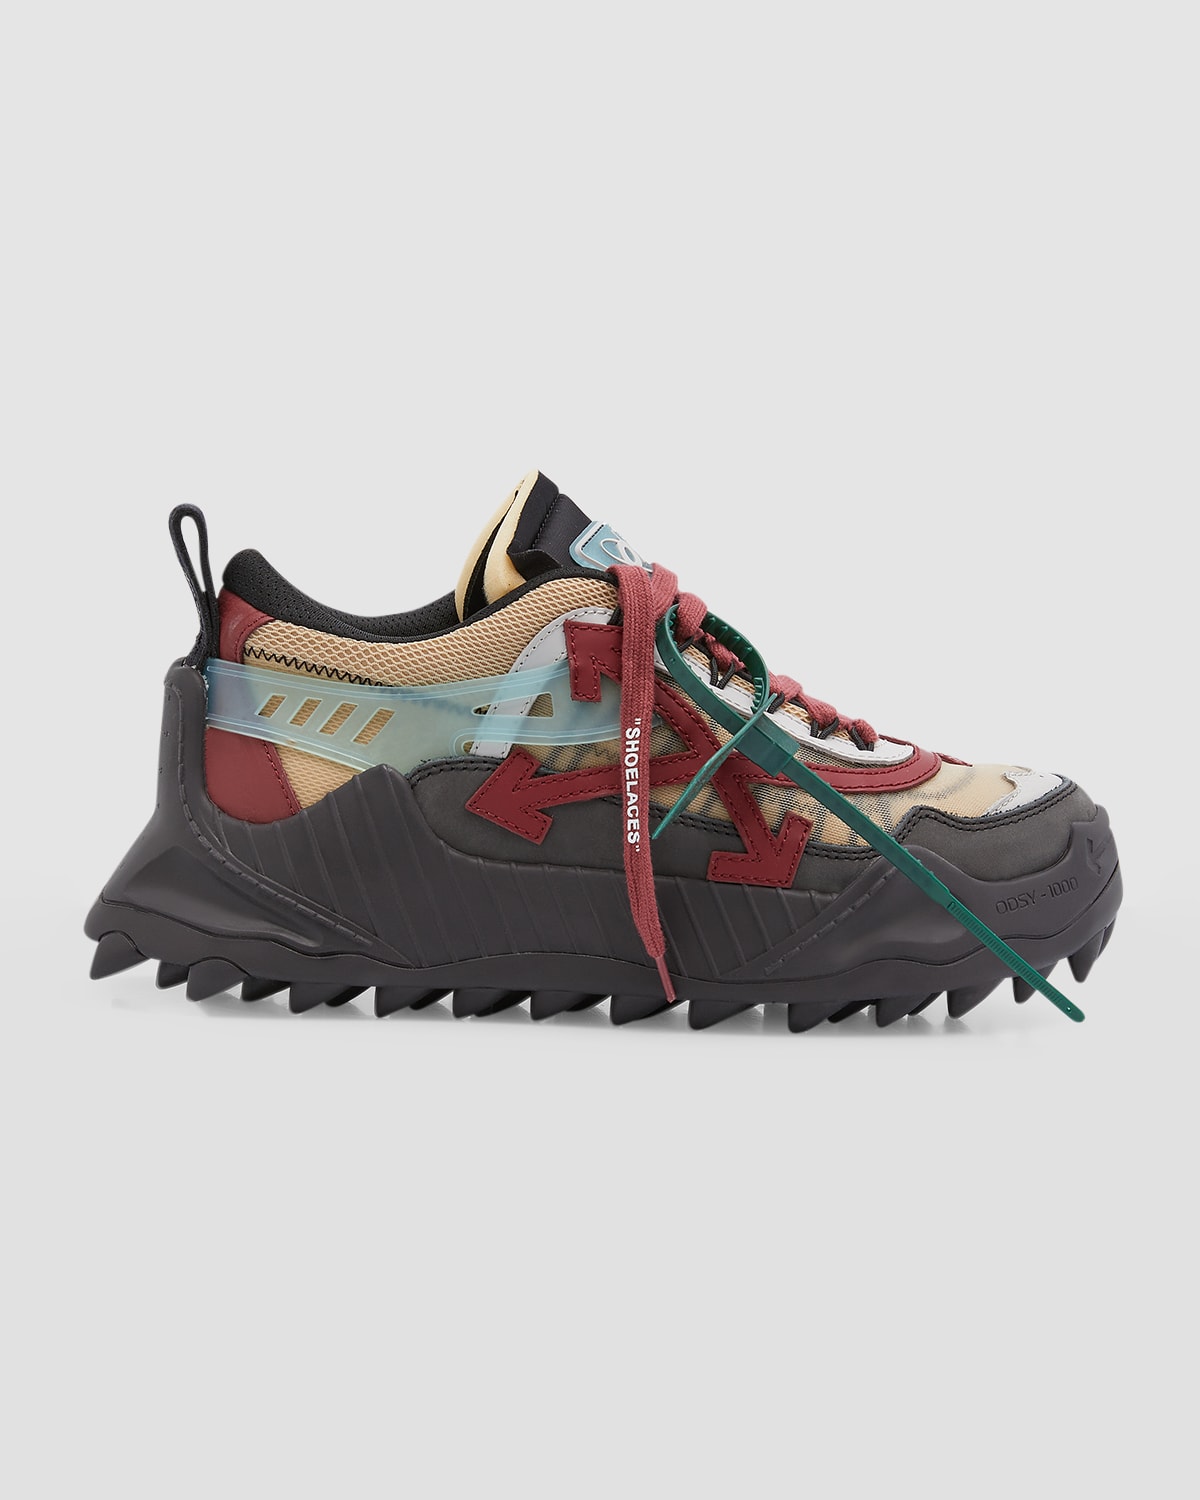 Off-White Men's Odsy 1000 Mixed Media Low-Top Sneakers | Neiman Marcus